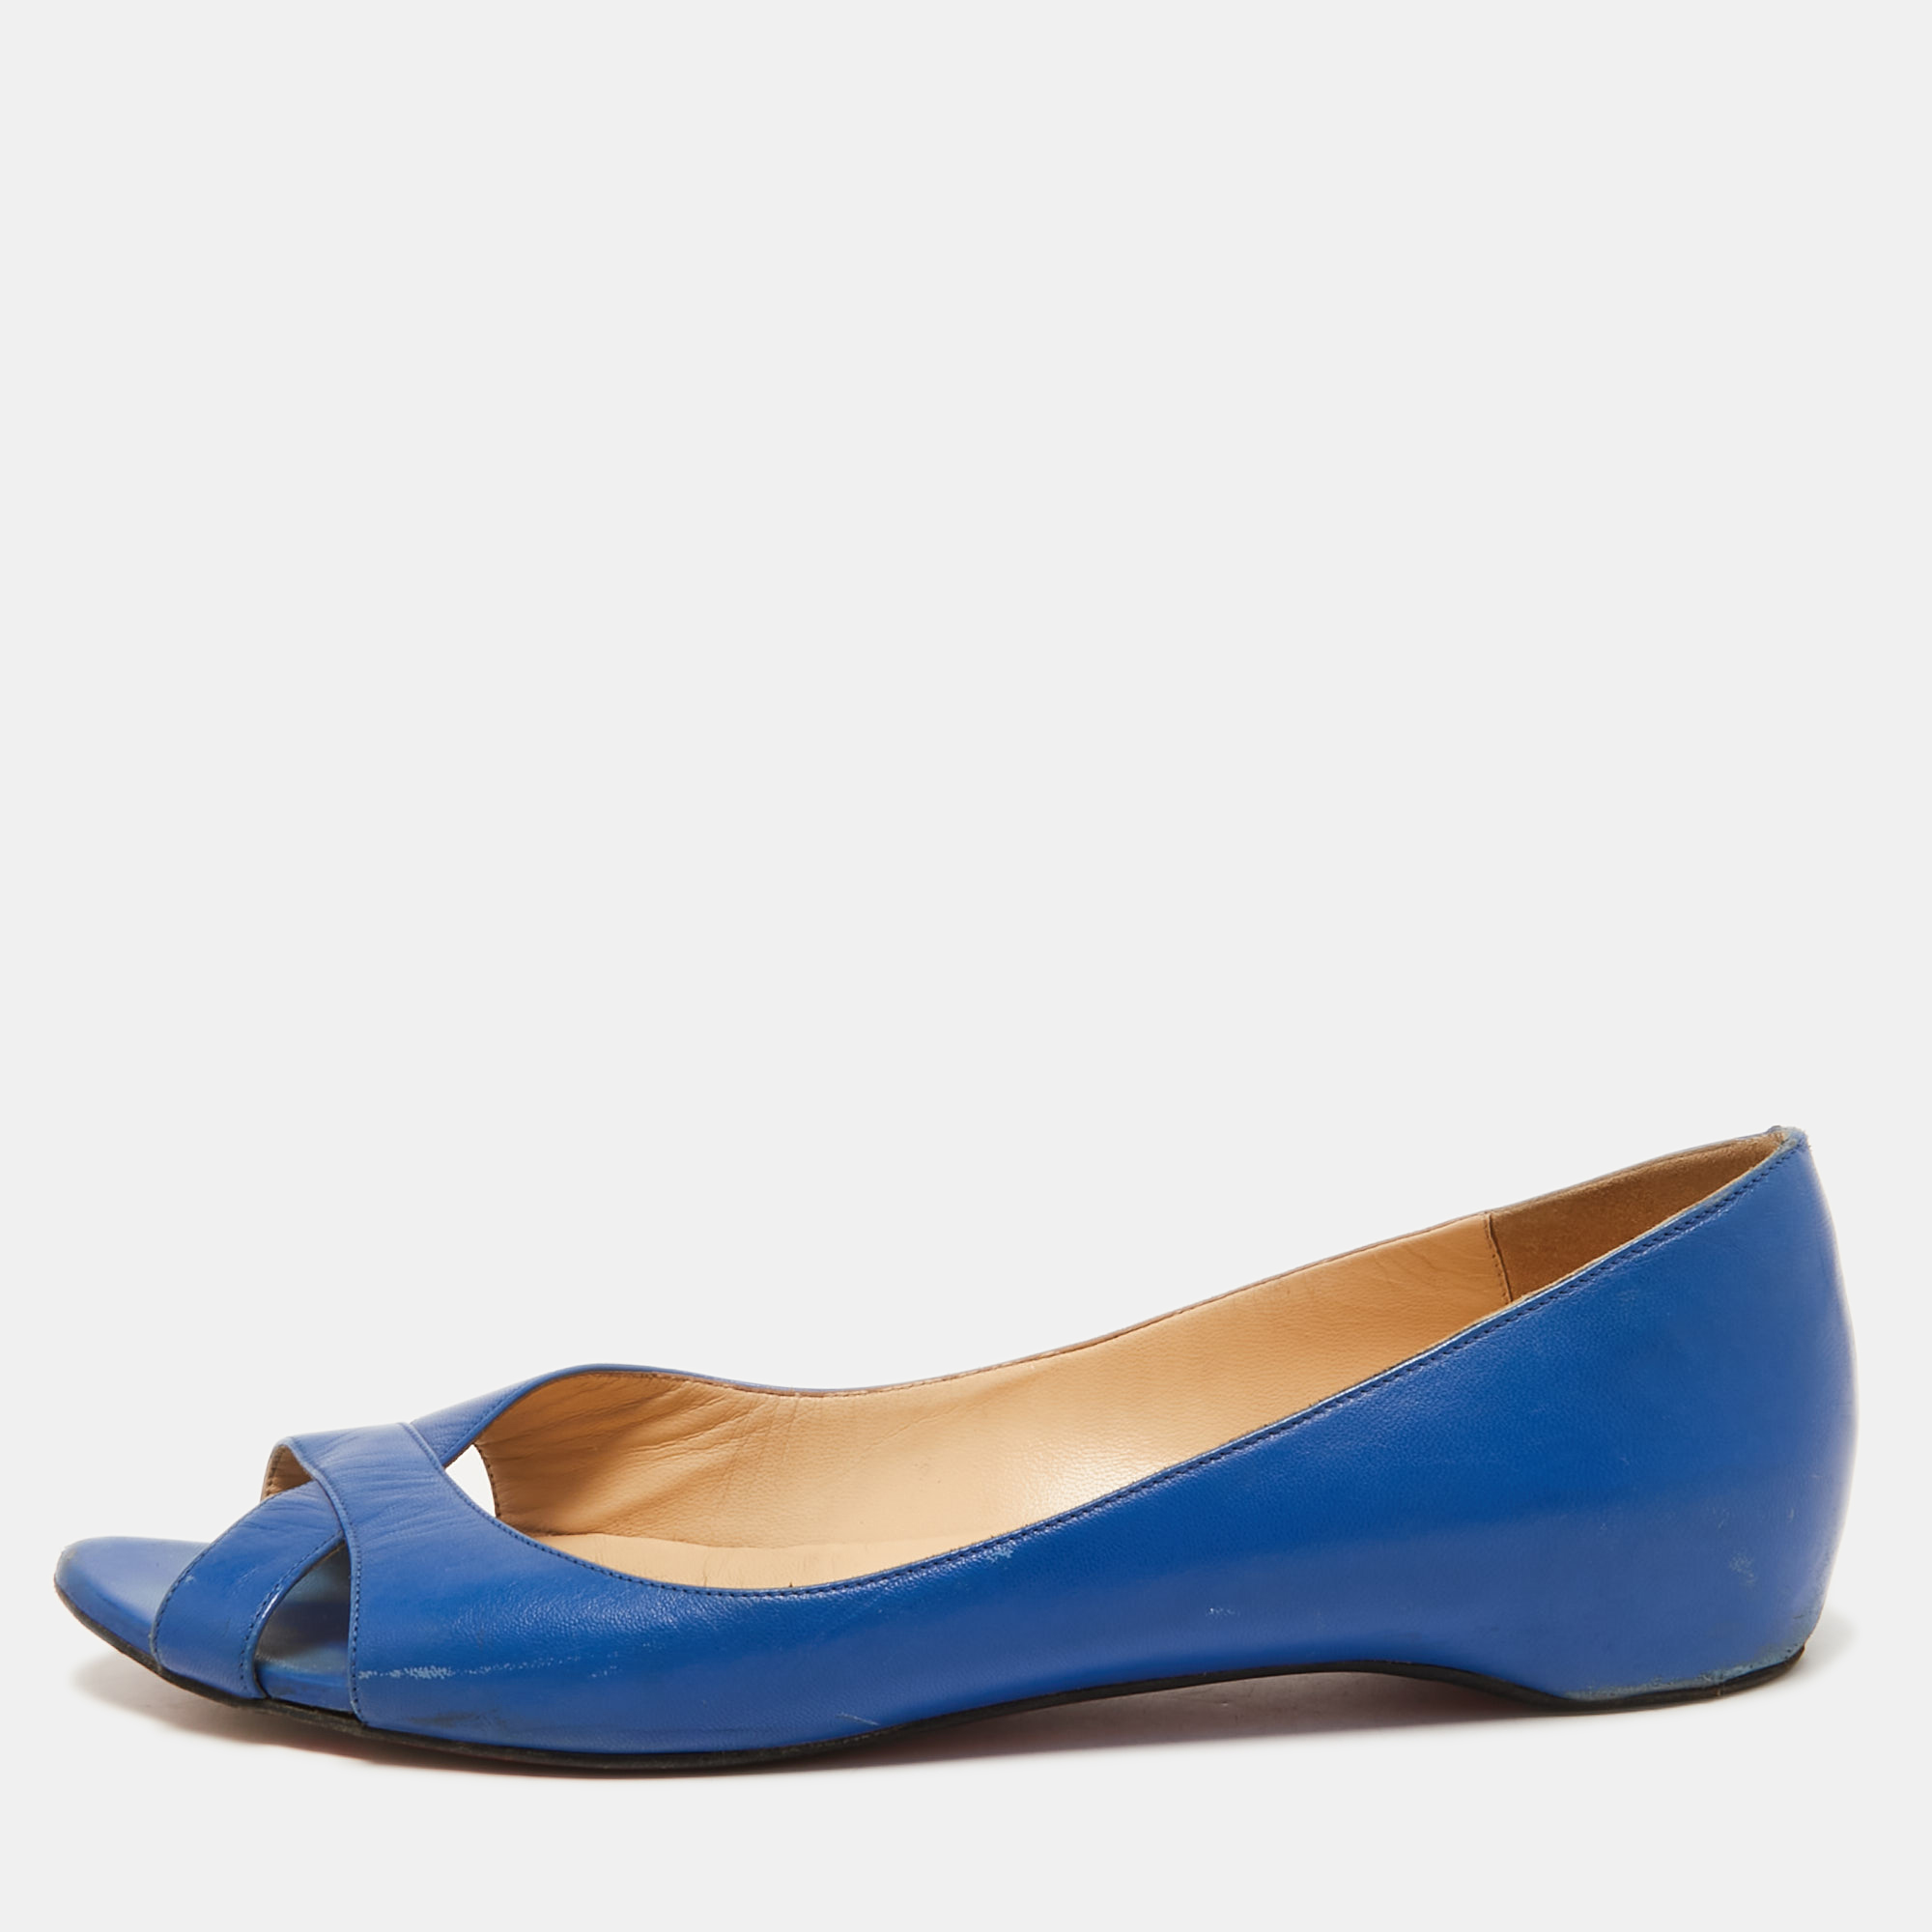 Pre-owned Christian Louboutin Blue Leather Crisscross Ballet Flats Size 38.5